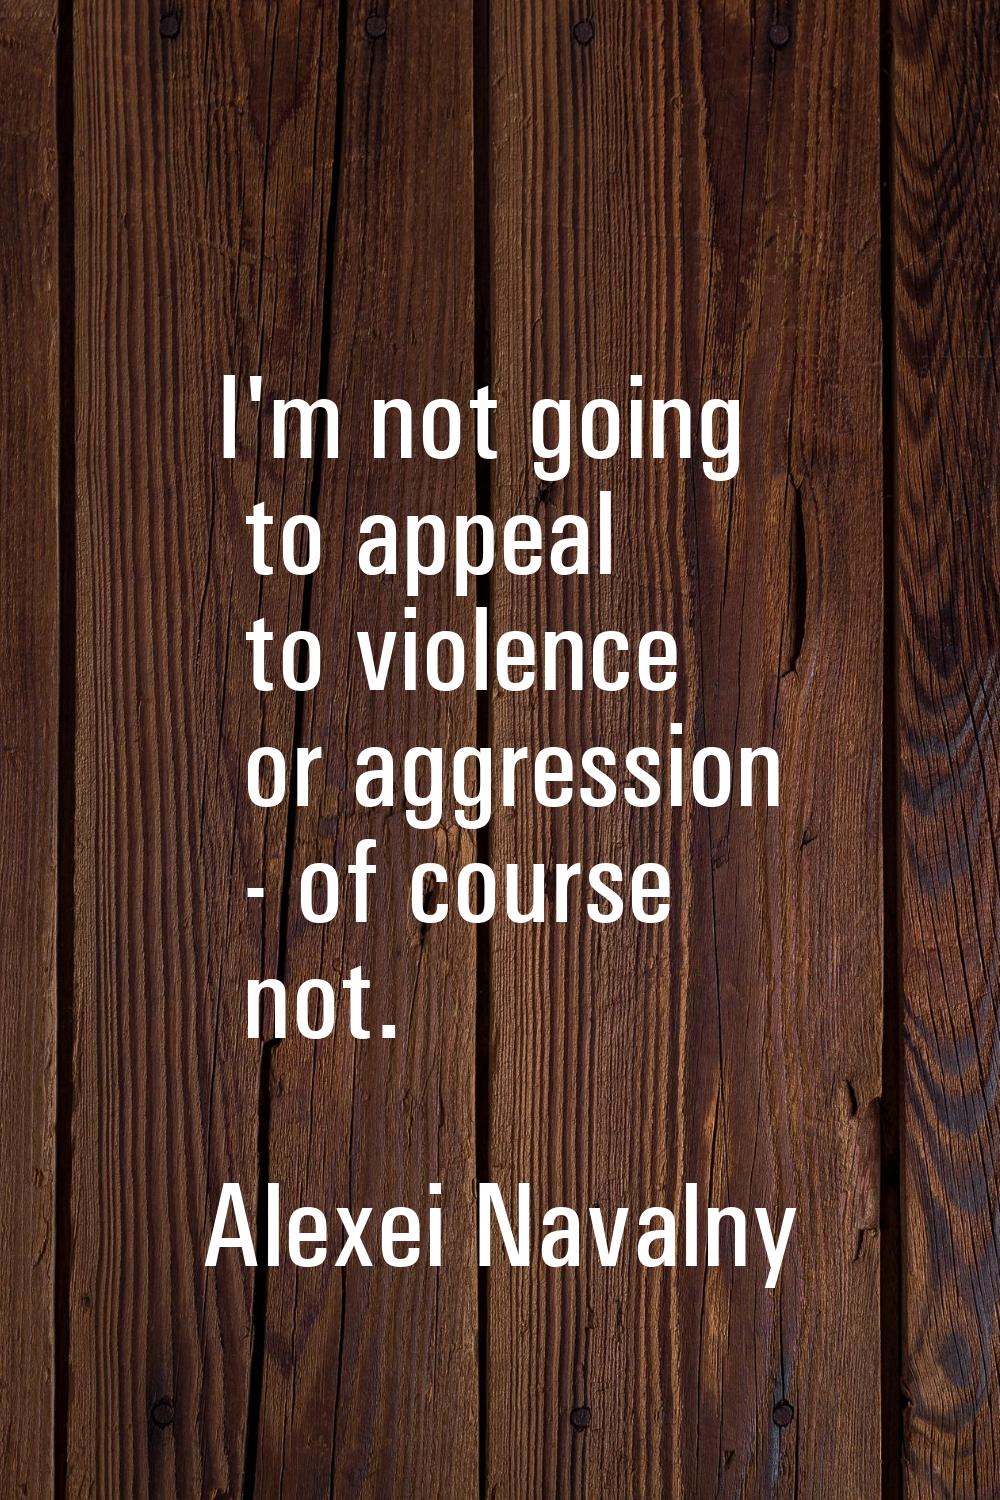 I'm not going to appeal to violence or aggression - of course not.